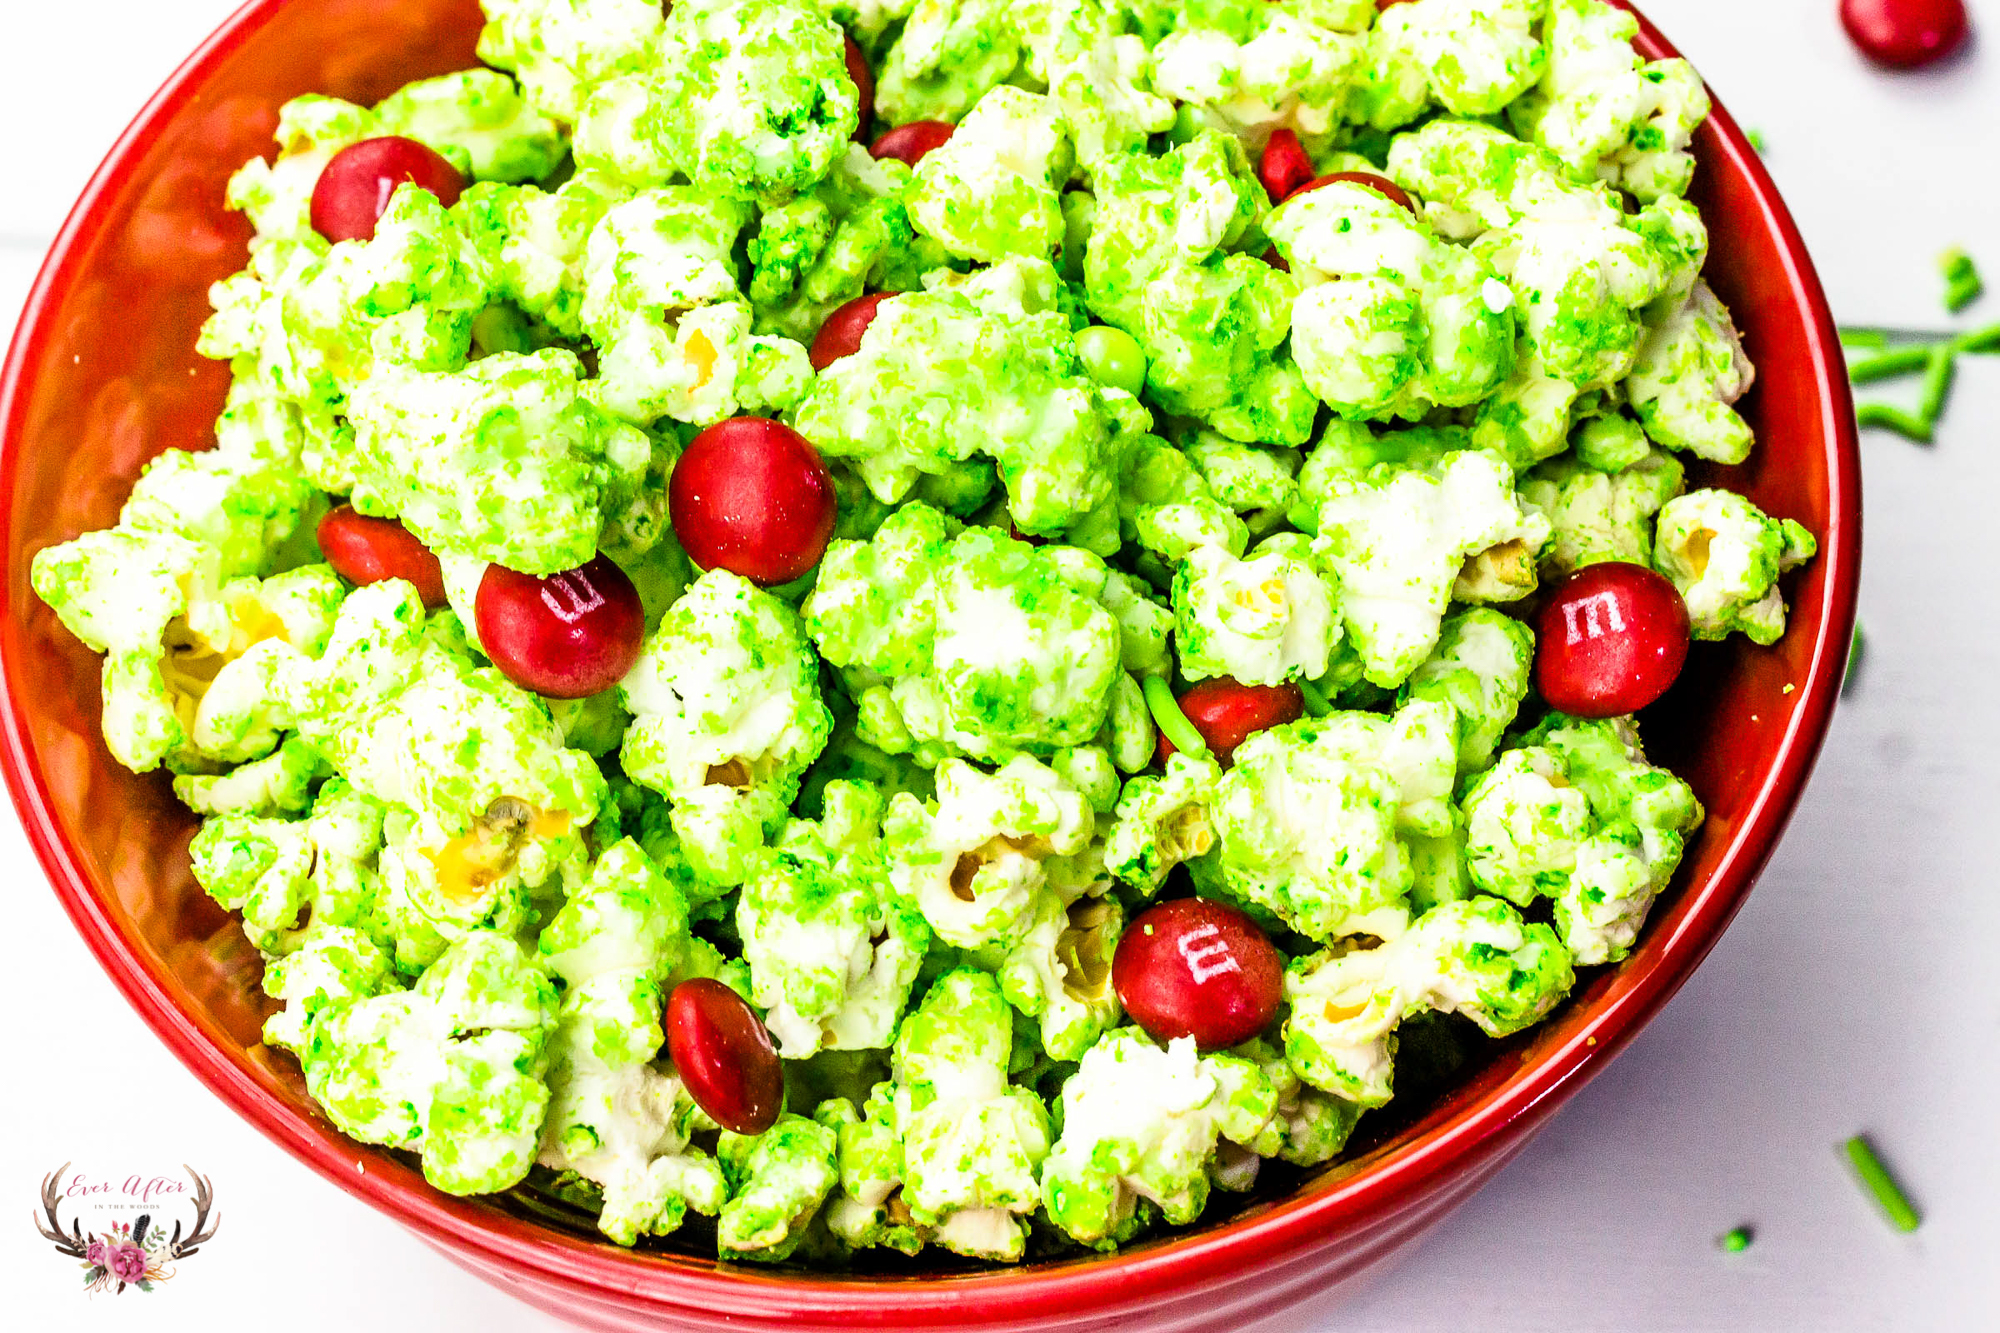 grinch popcorn for christmas